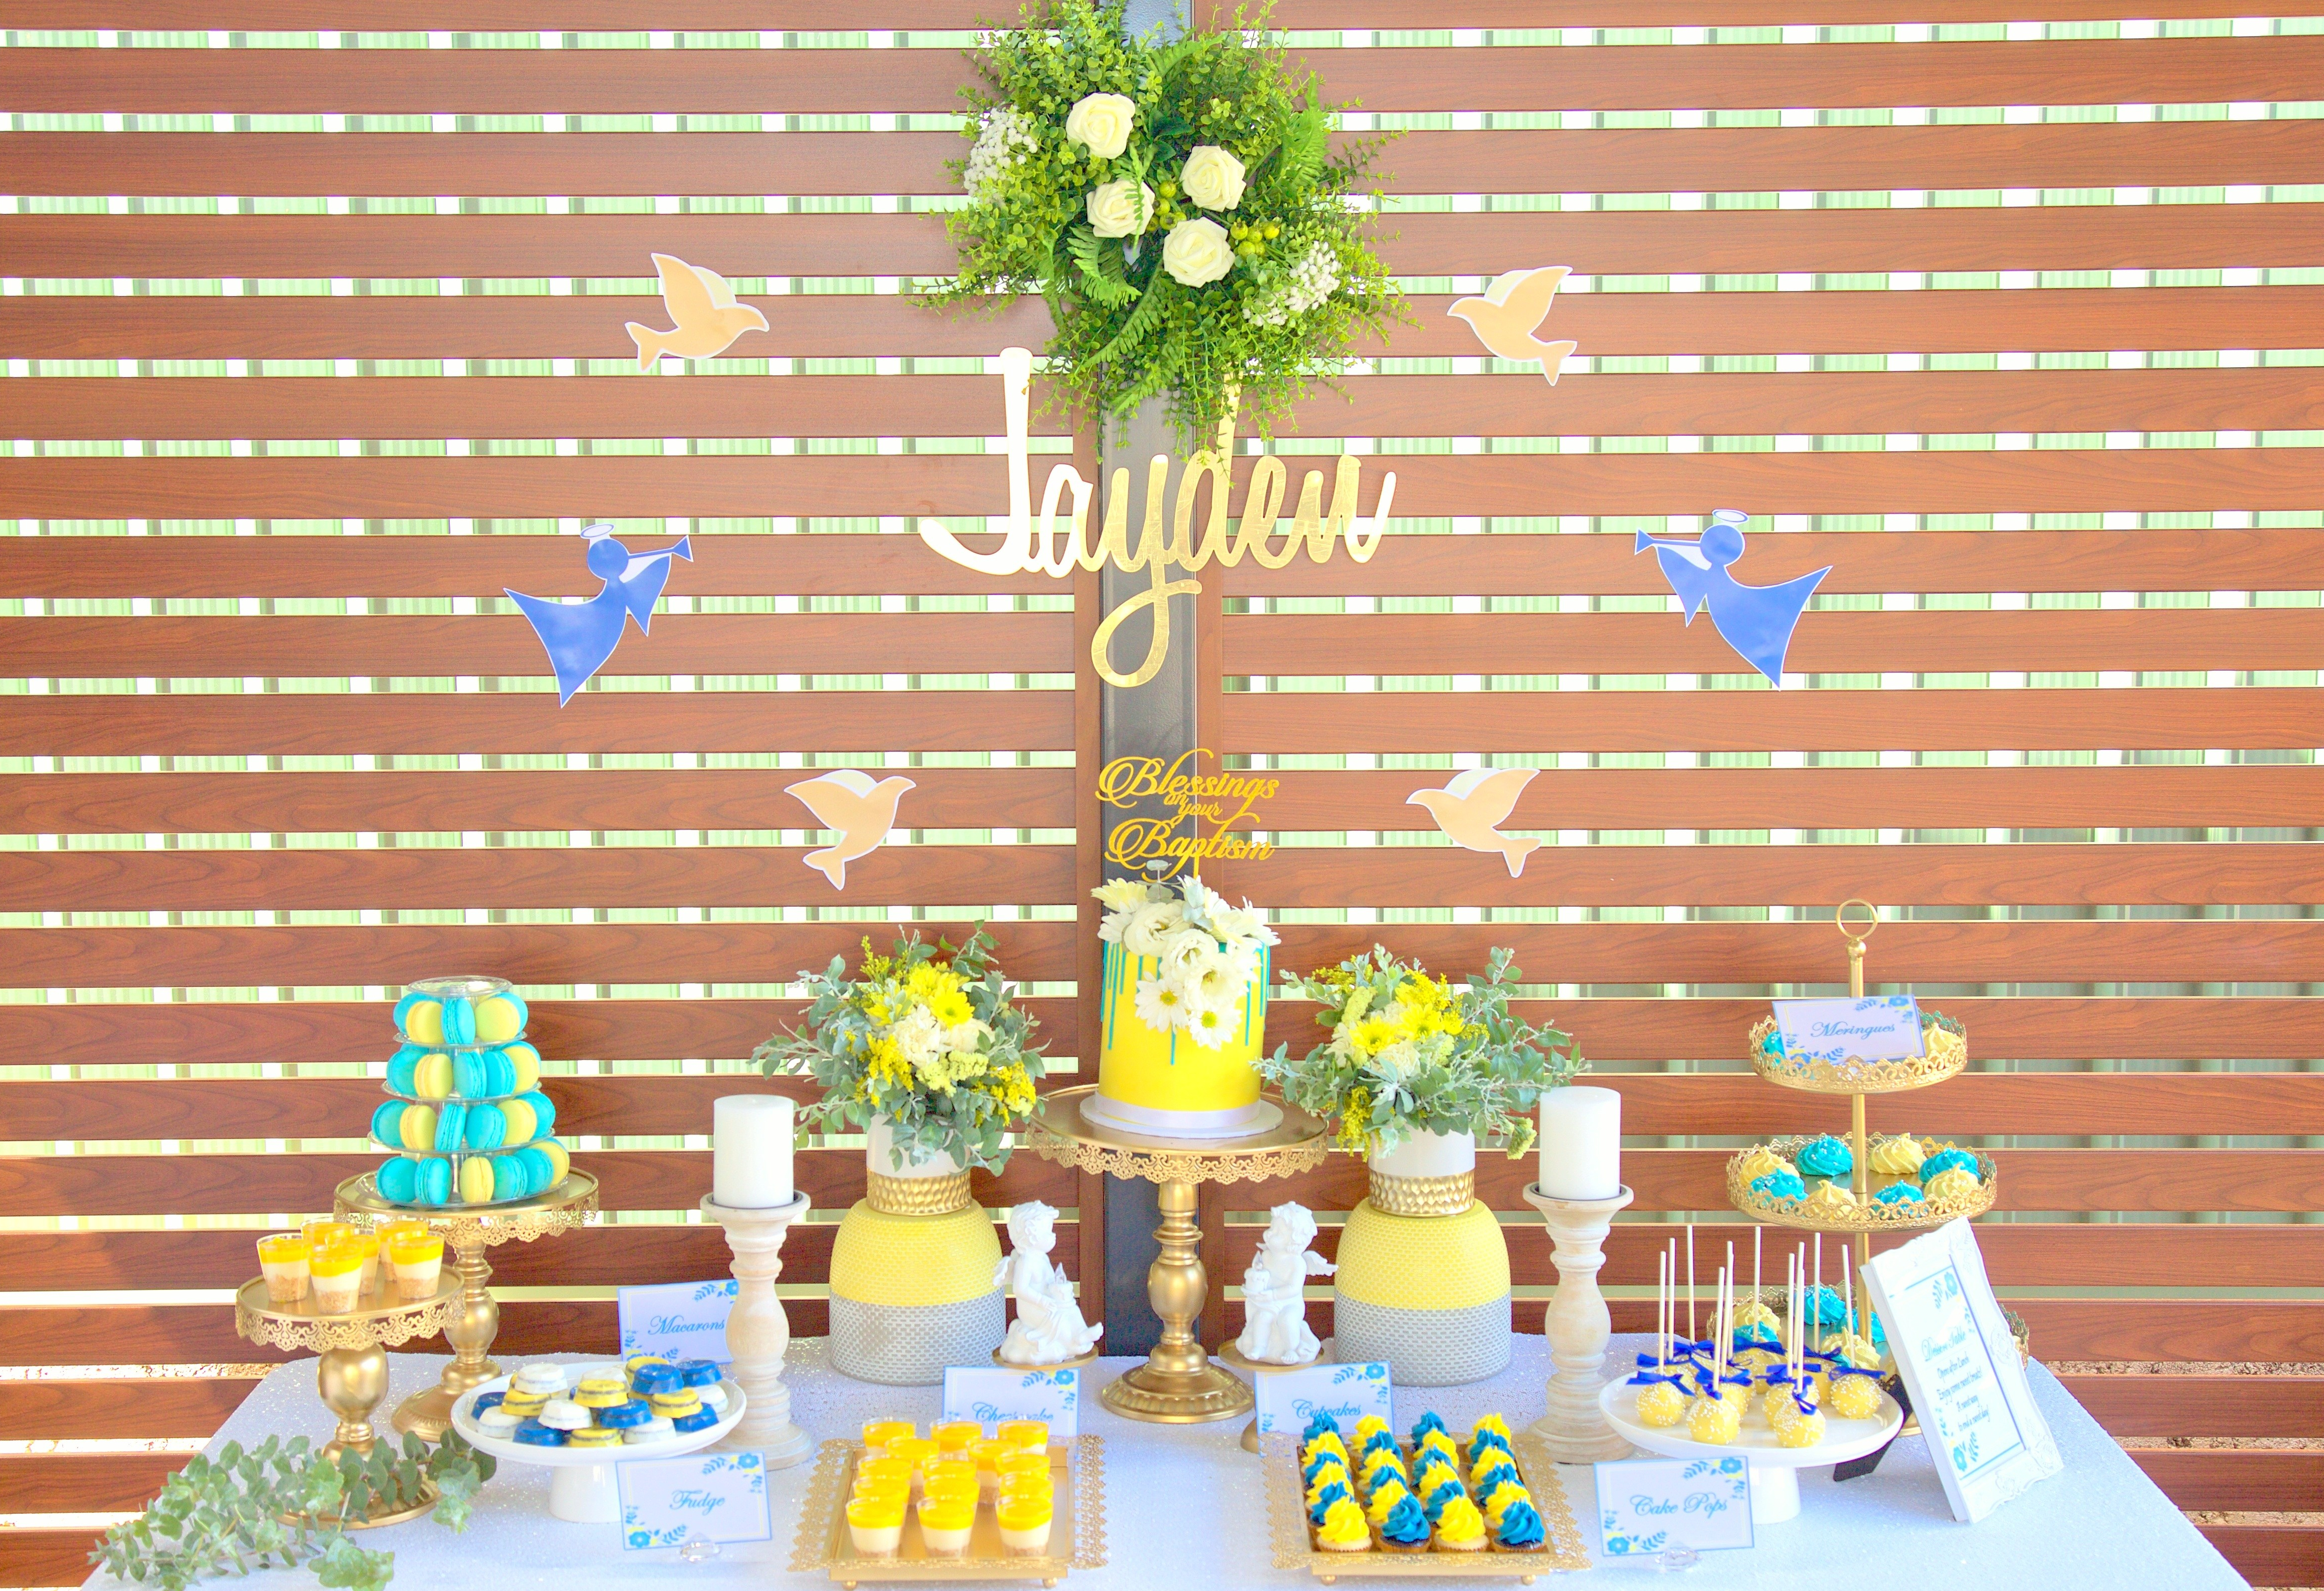 Blue and yellow themed dessert table.